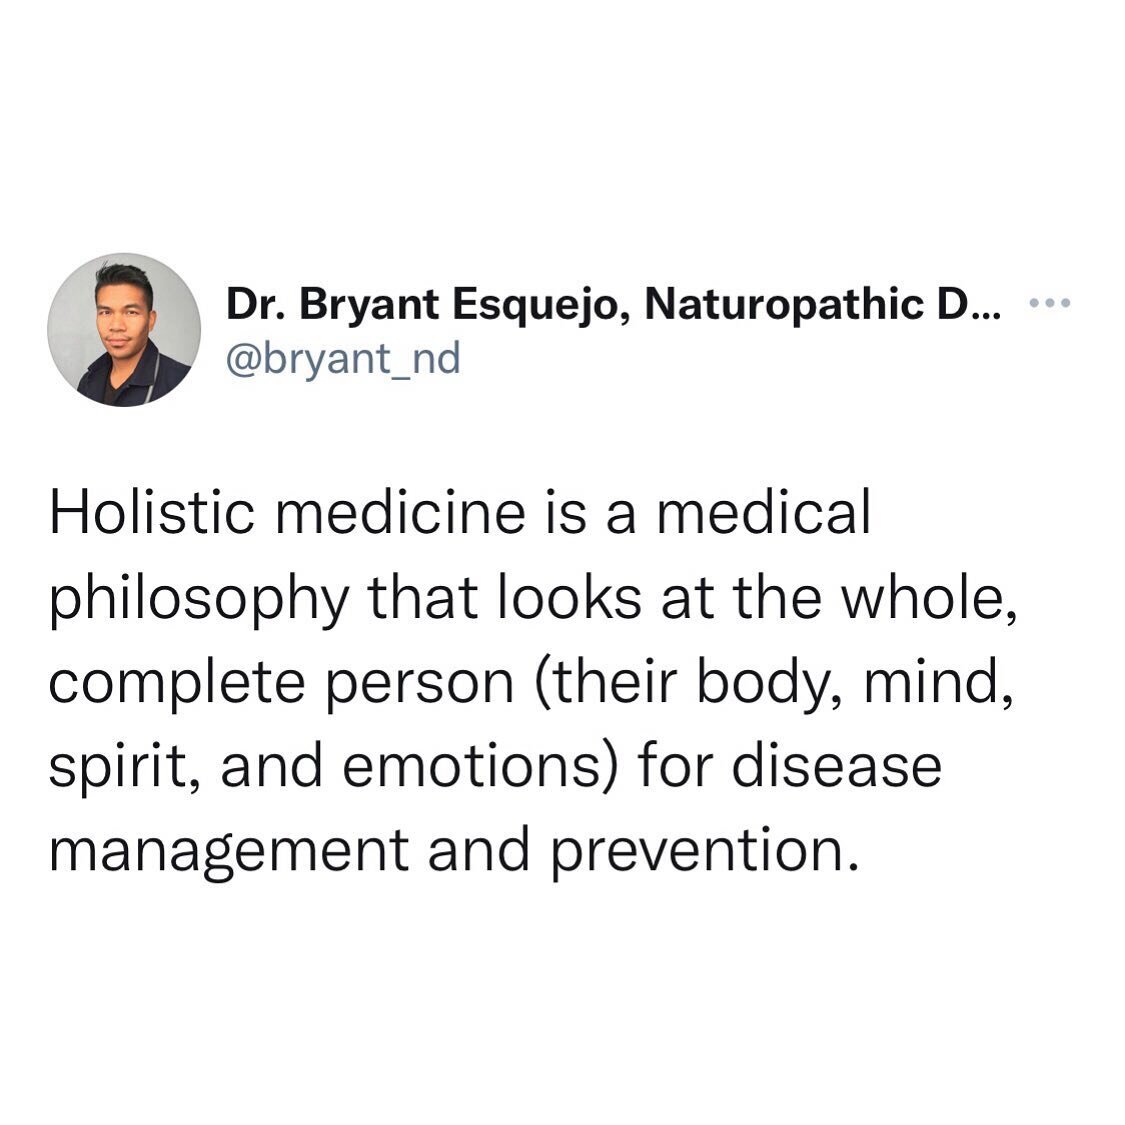 Let&rsquo;s clear things up: 
Holistic medicine can sometimes be integrative. Natural medicine is not always holistic.
➡️As long as a recommended plan addresses the whole, complete person, it could be deemed as holistic. So, holistic treatment plans 